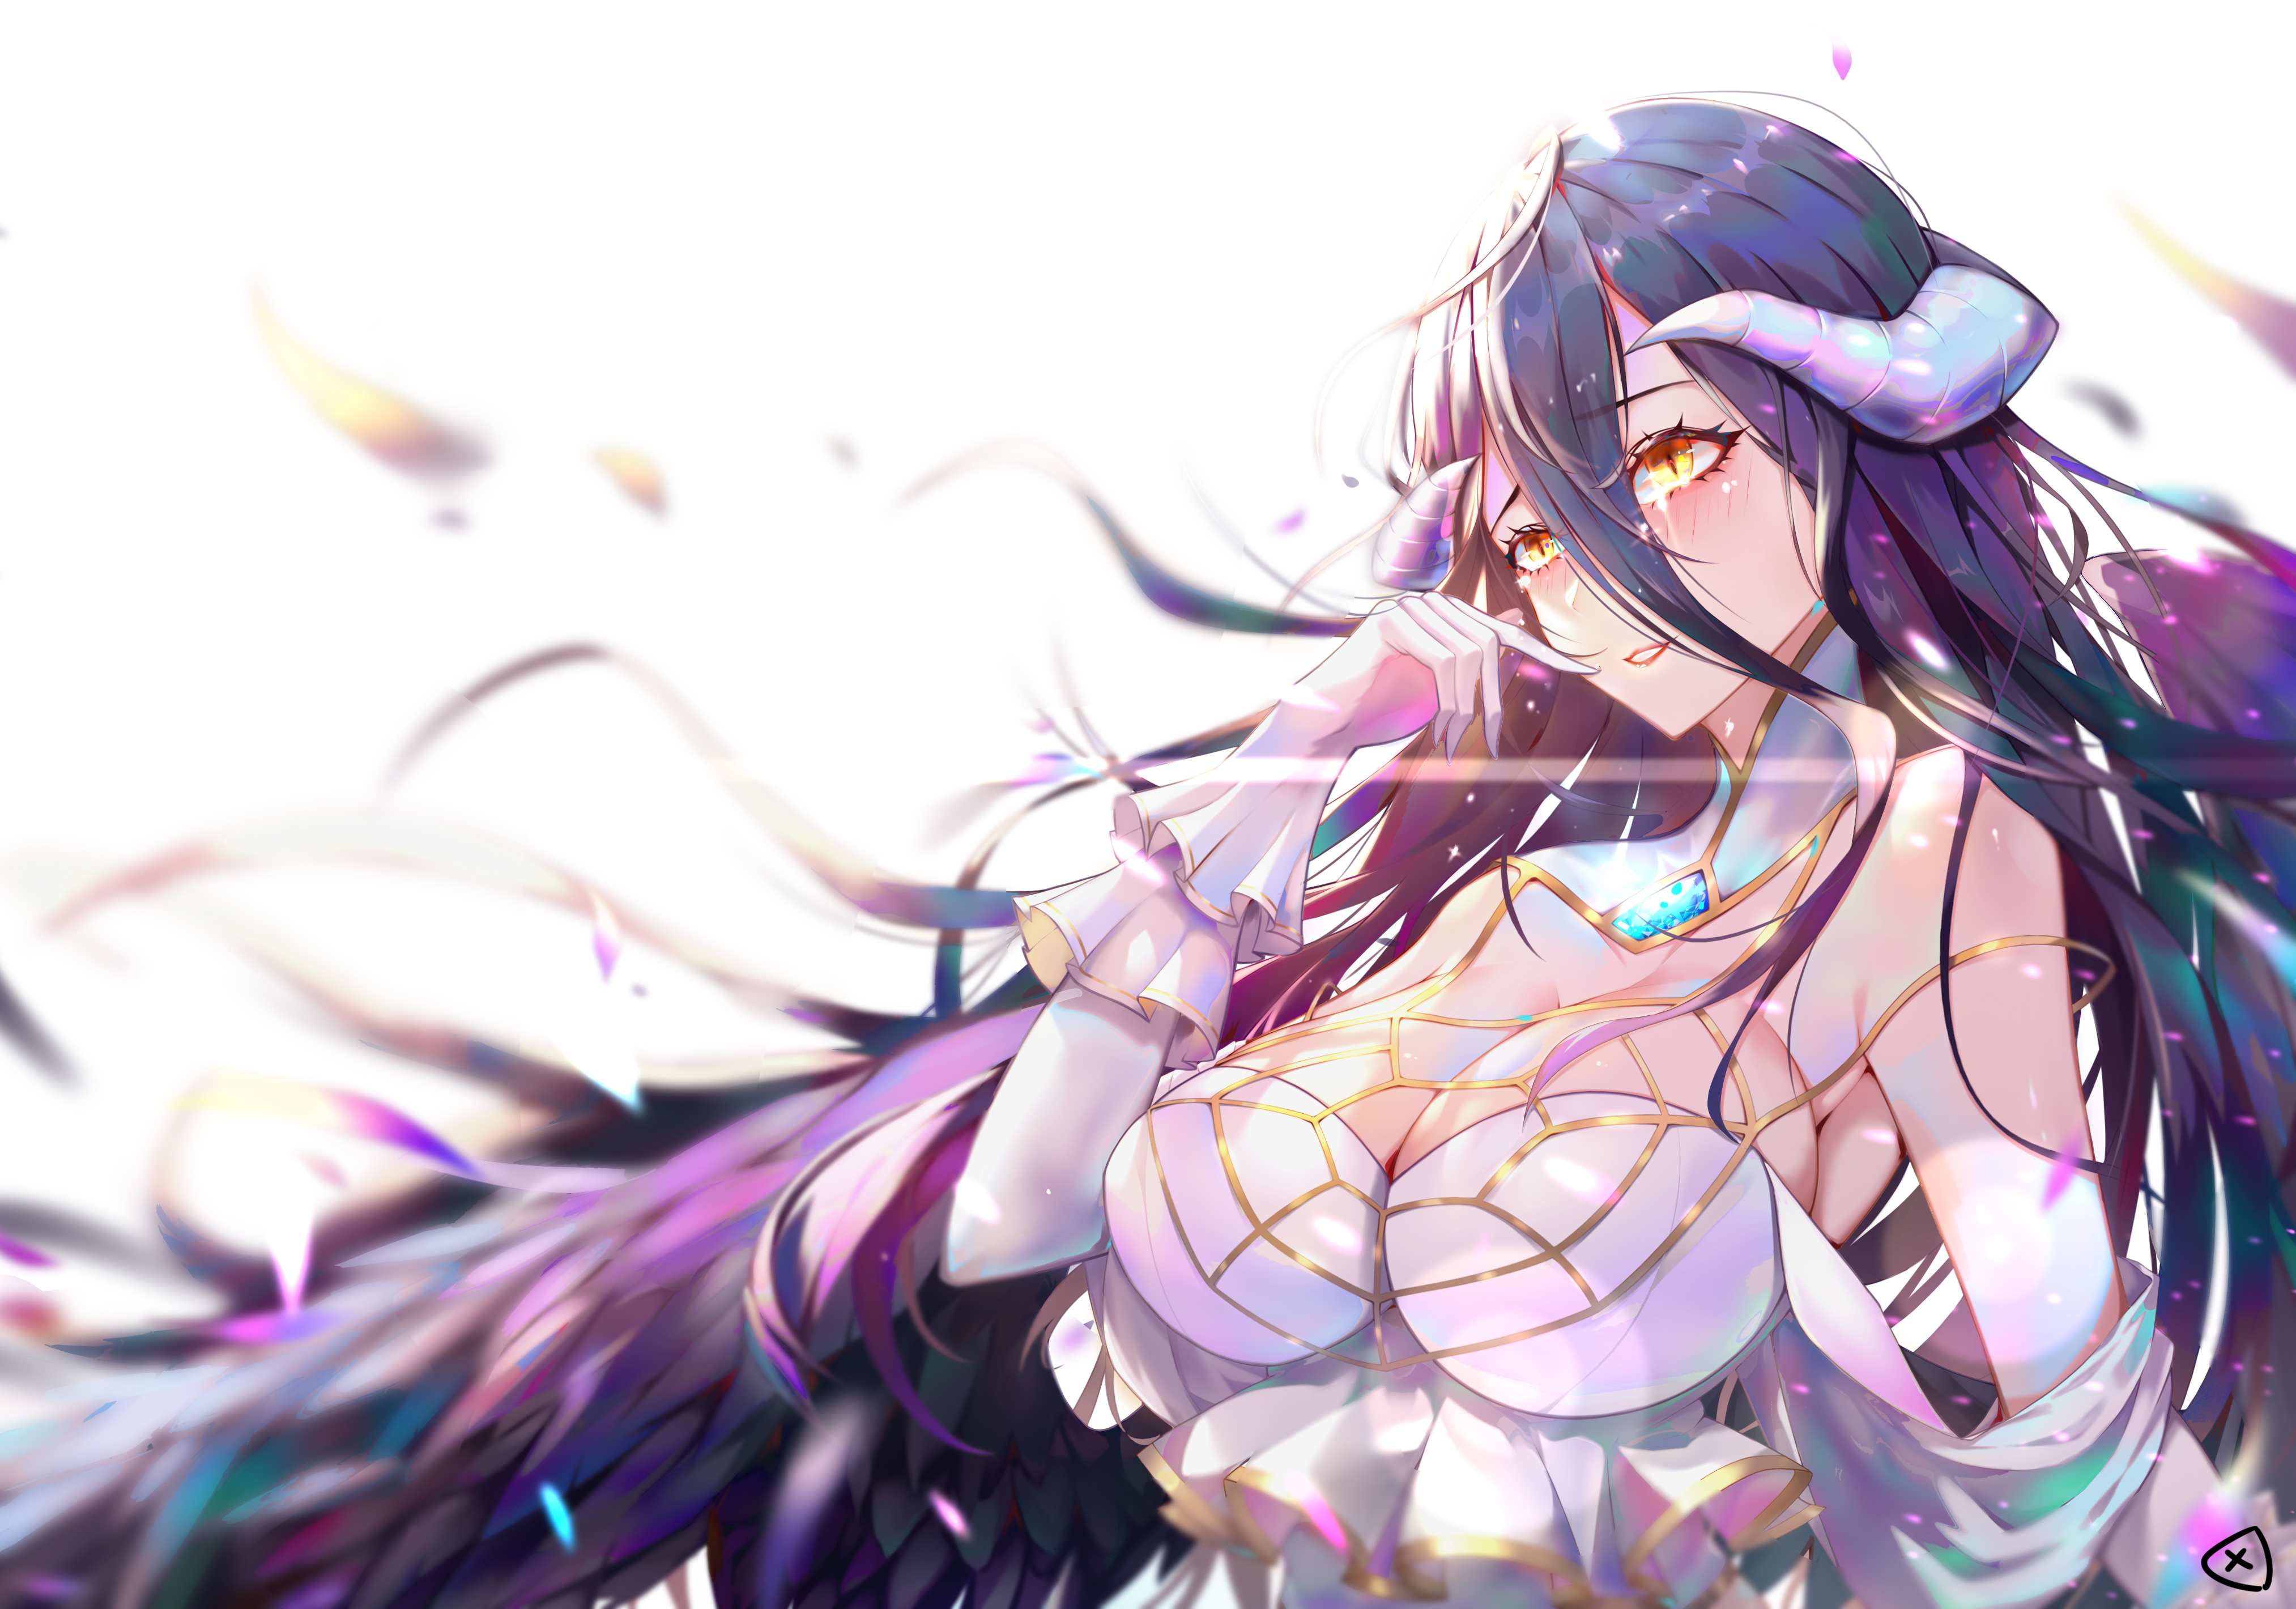 Anime 4053x2840 Albedo (OverLord) Overlord (anime) anime girls anime succubus dark hair long hair wings horns yellow eyes looking at viewer blushing gloves cleavage dress bokeh white background crying tears portrait artwork fan art drawing 2D illustration digital art Xianyujun Sam